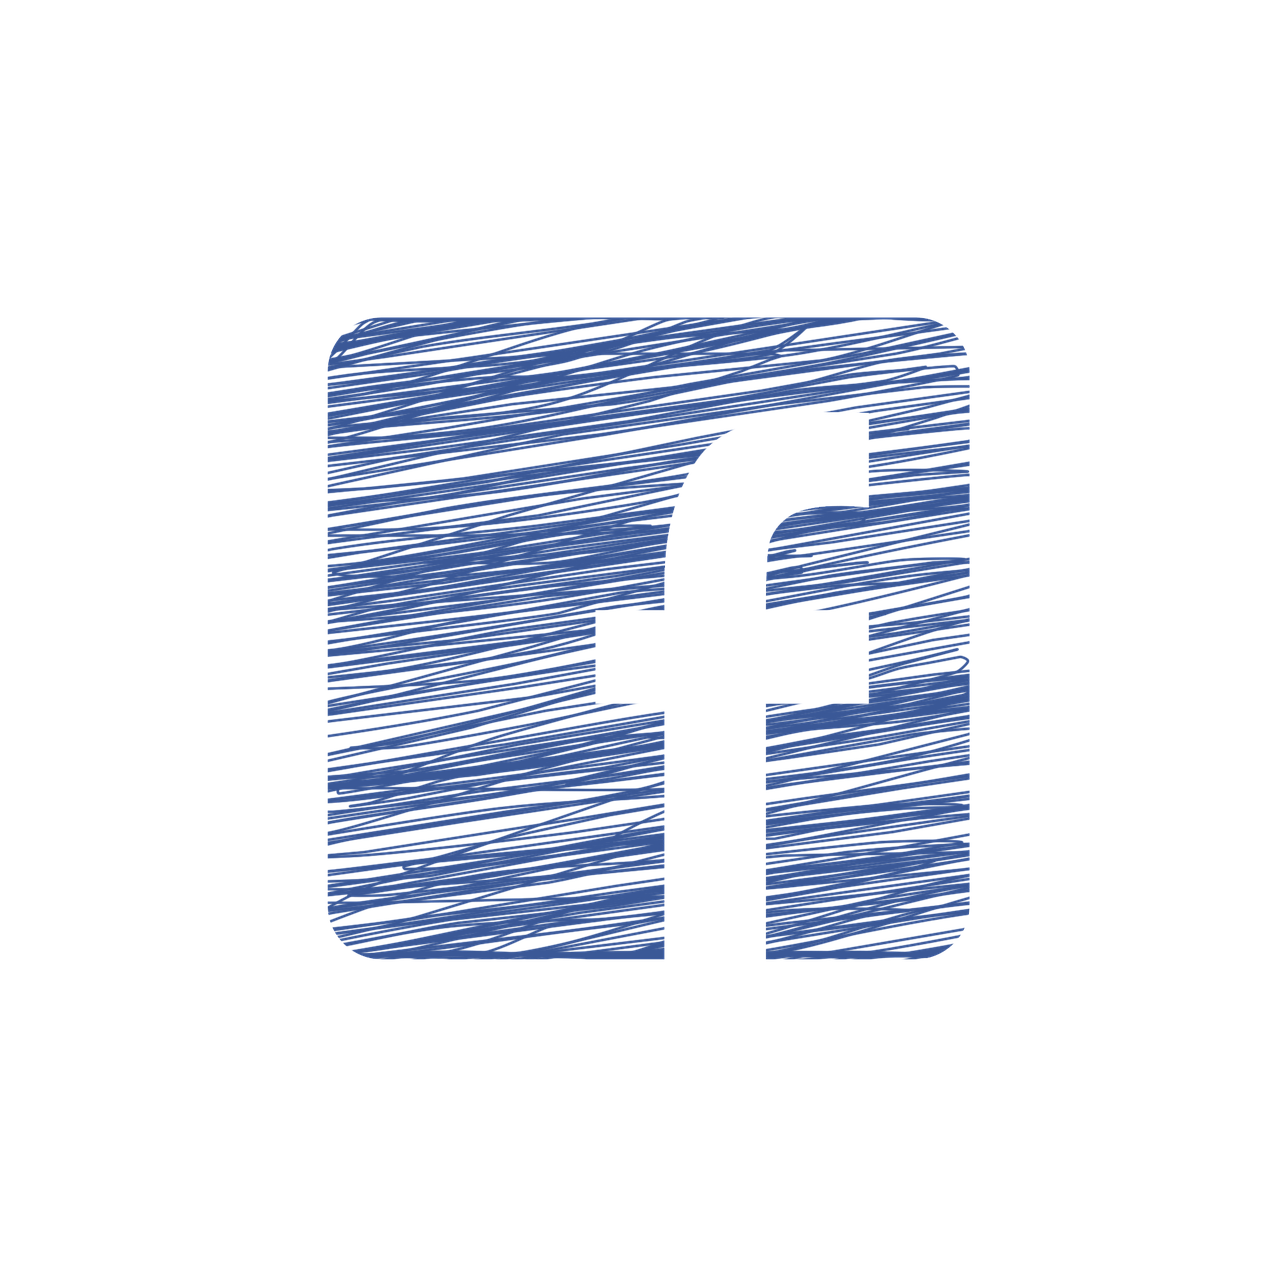 From Facemash to Global Force: The Story of Facebook and Its Present Situation